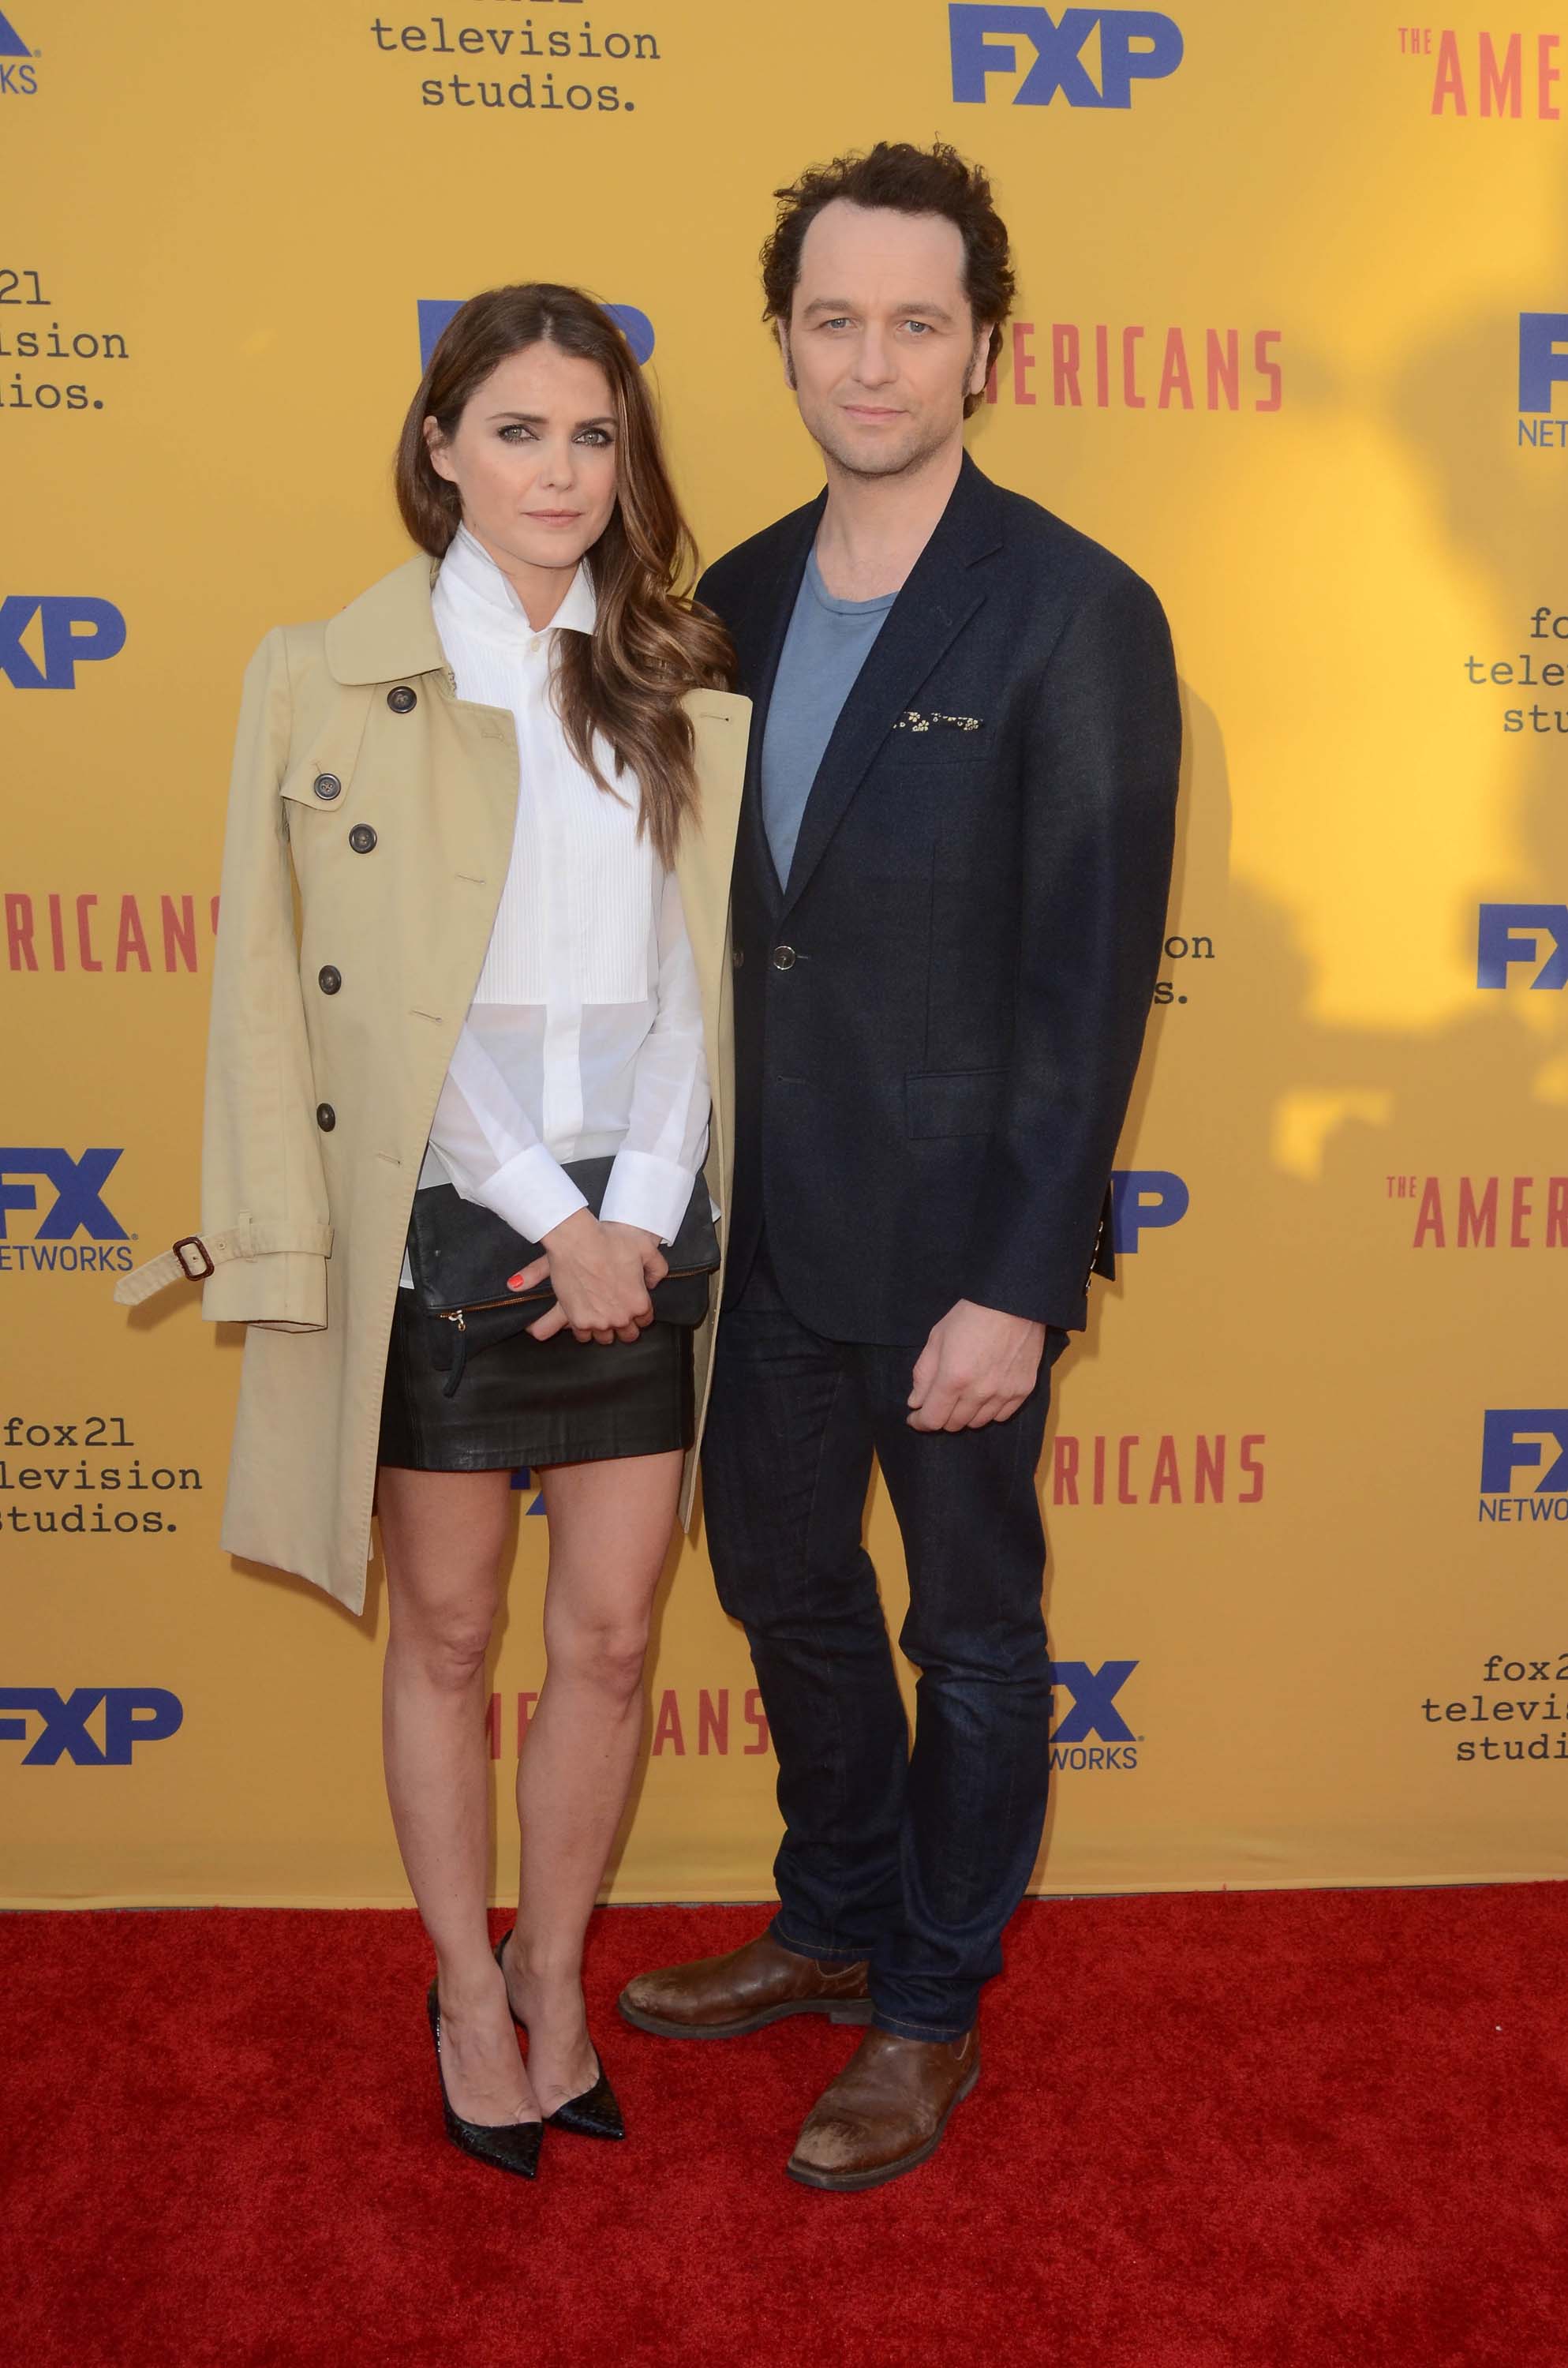 Keri Russell attends The Americans TV show FYC event